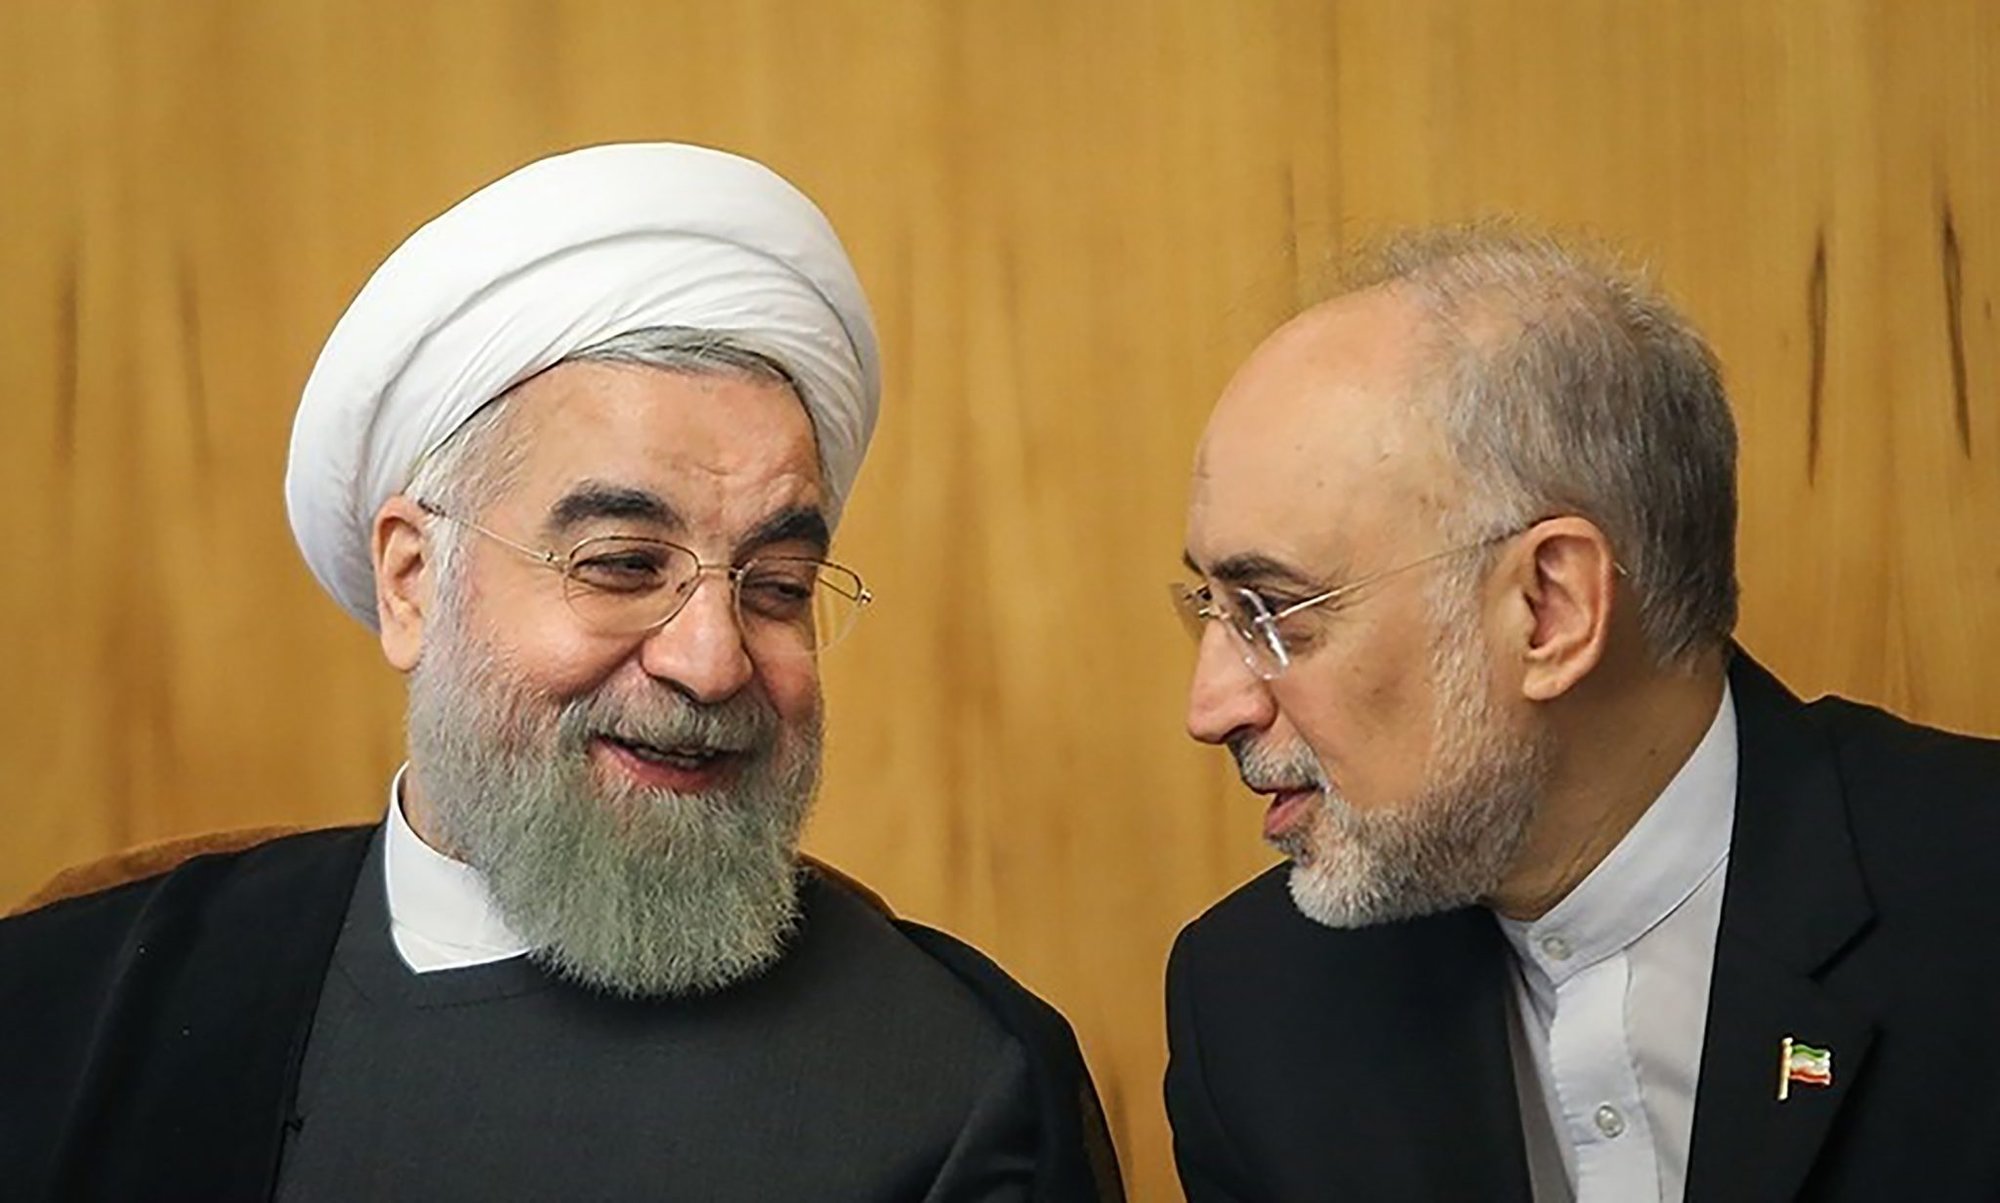 Iran’s cabinet members during a meeting. Wikimedia Commons image.